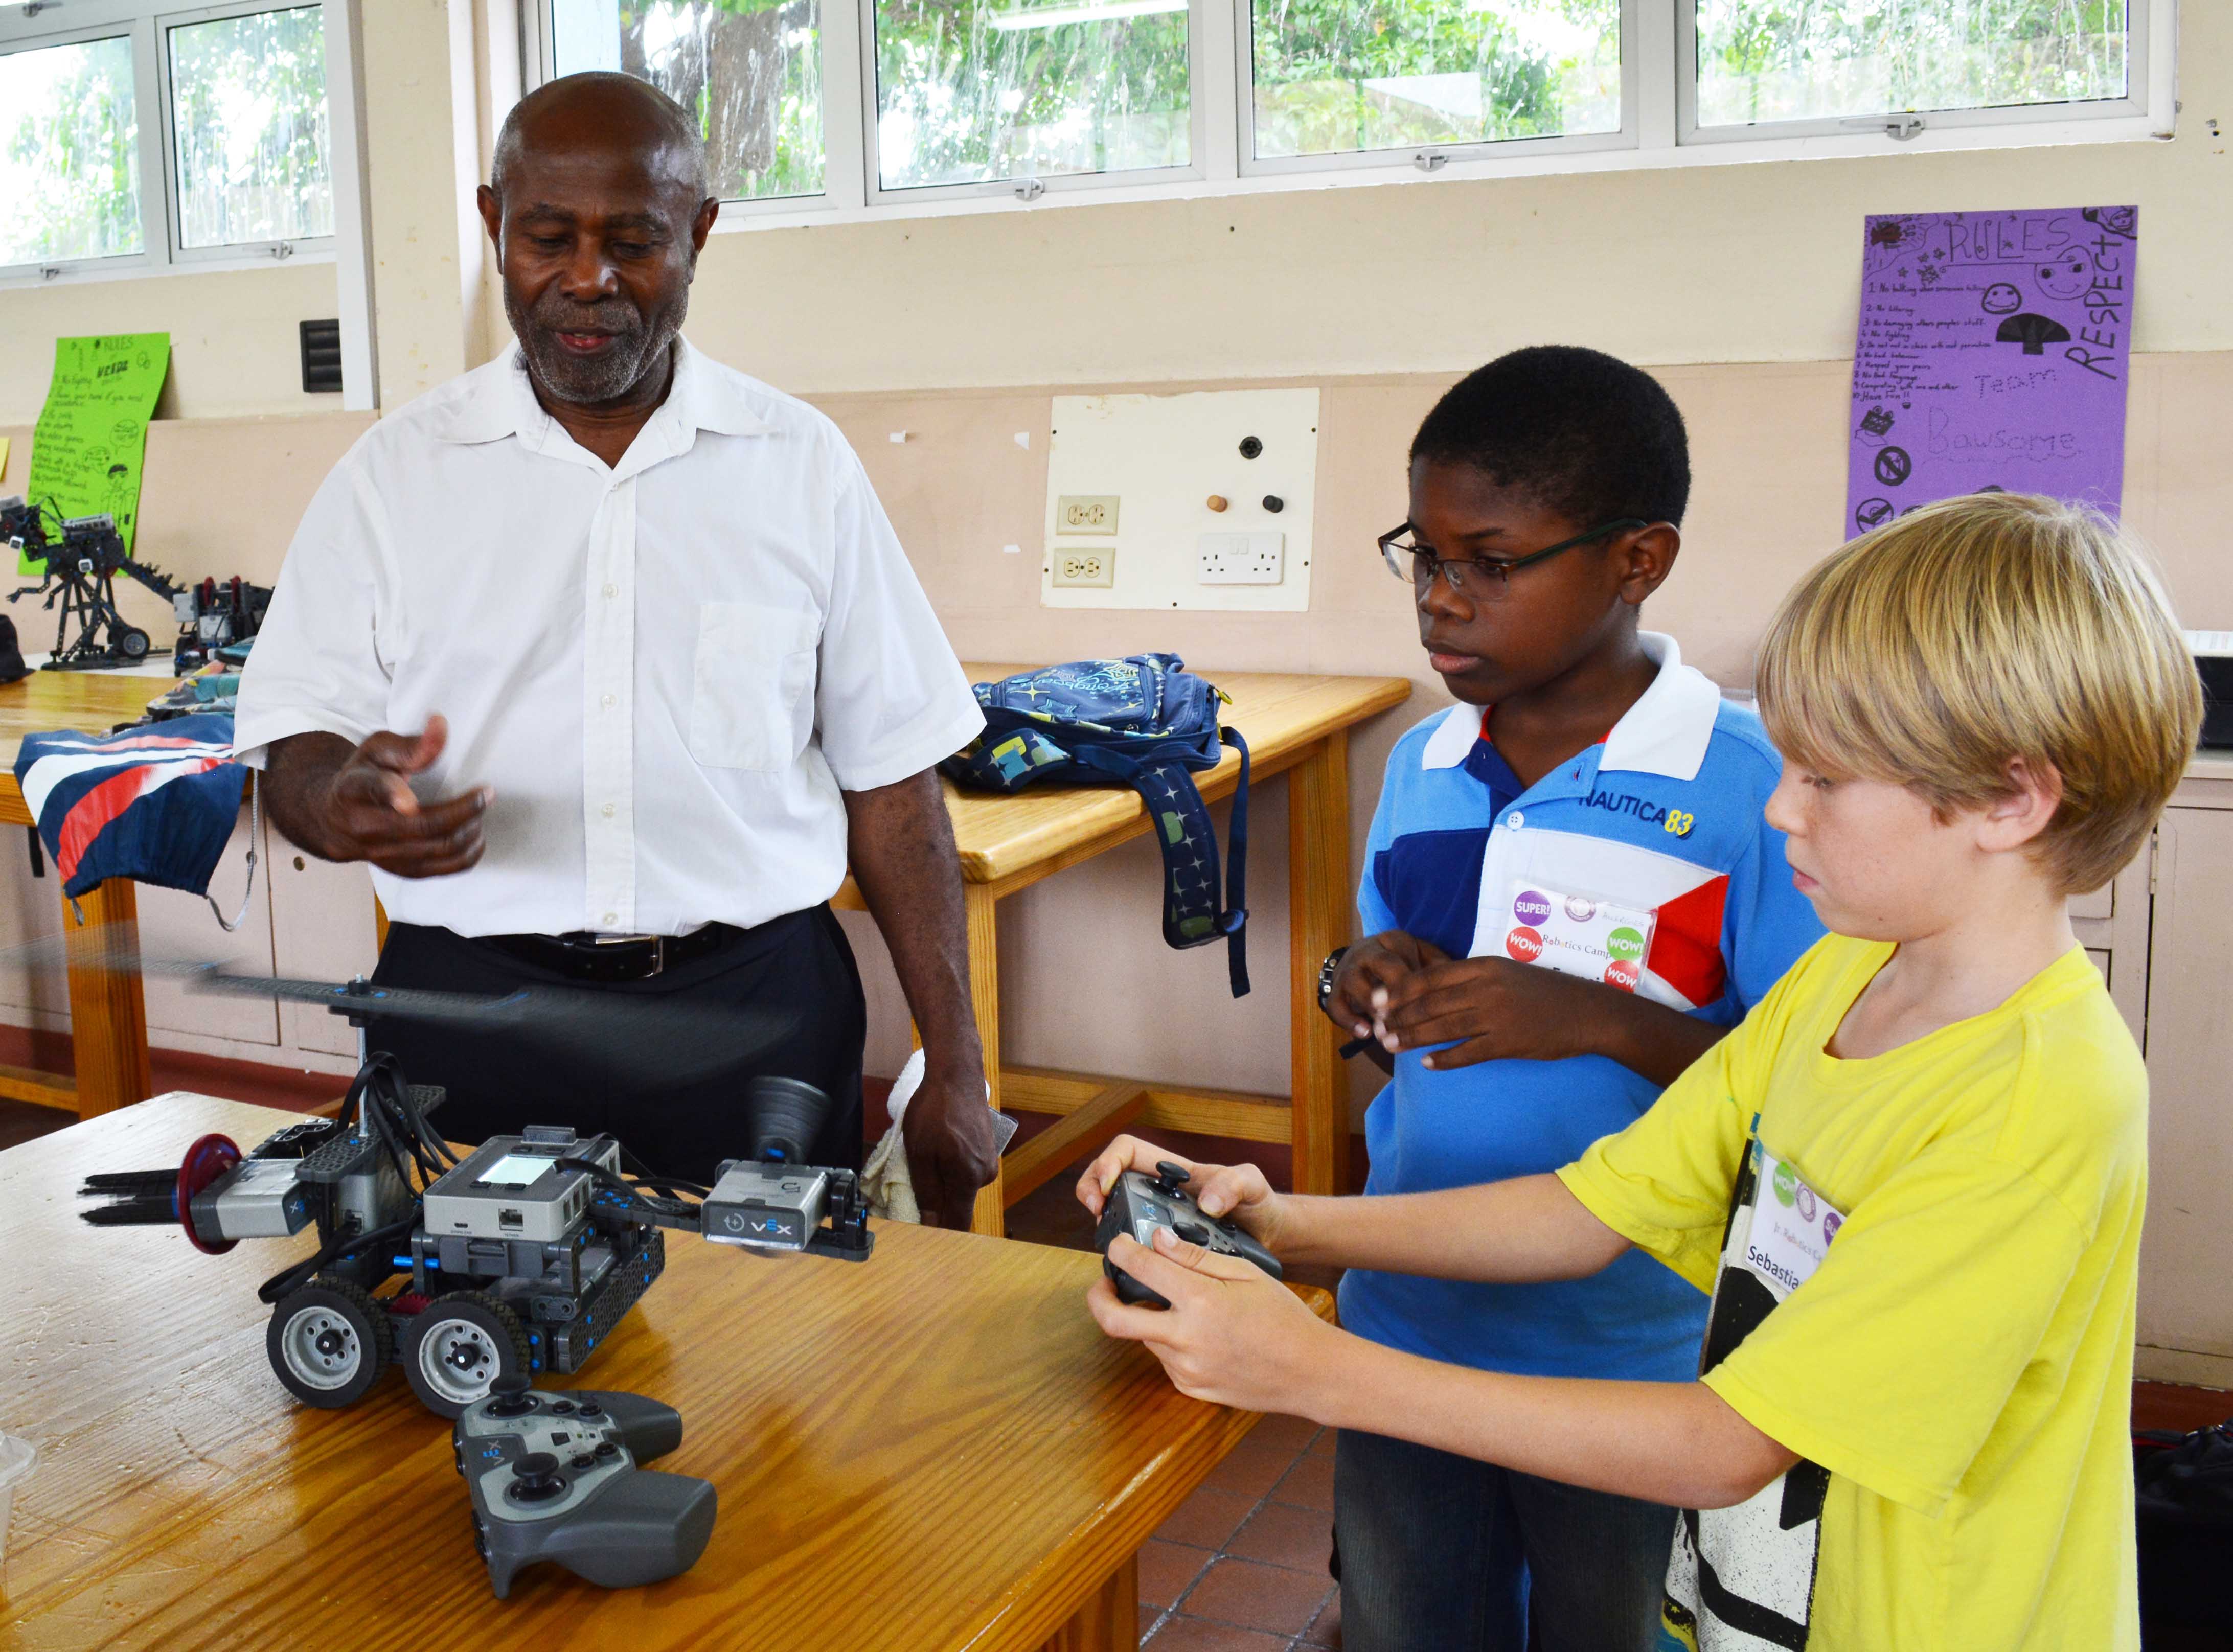 Barbados Junior Robotics Camp Turns 3 with 48 Students in 3 Levels